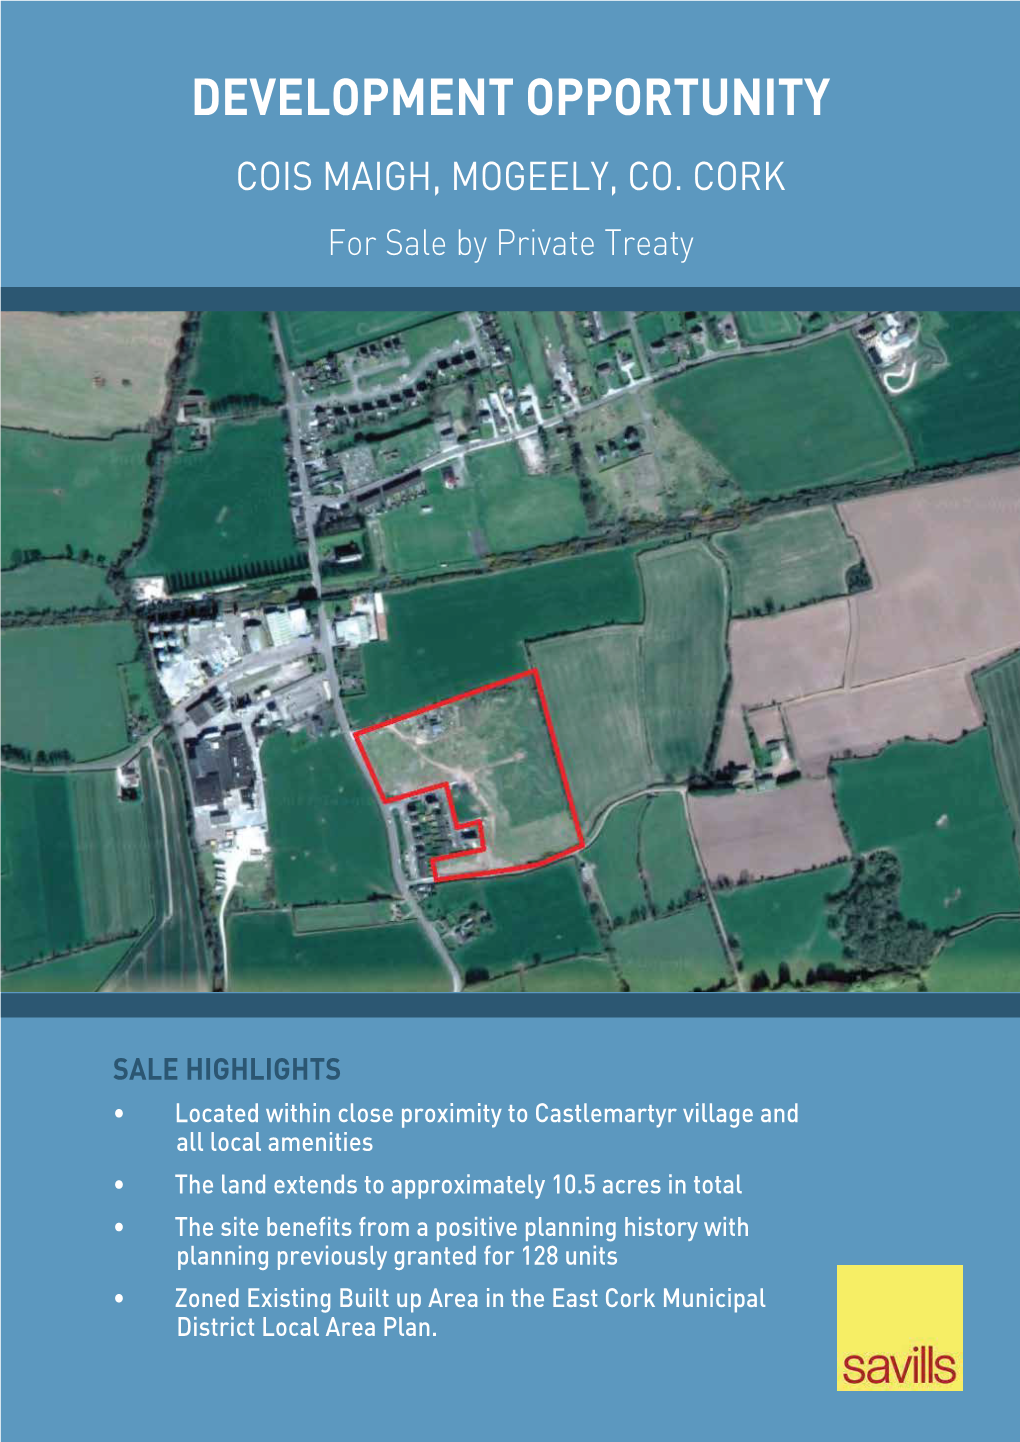 Development Opportunity Cois Maigh, Mogeely, Co